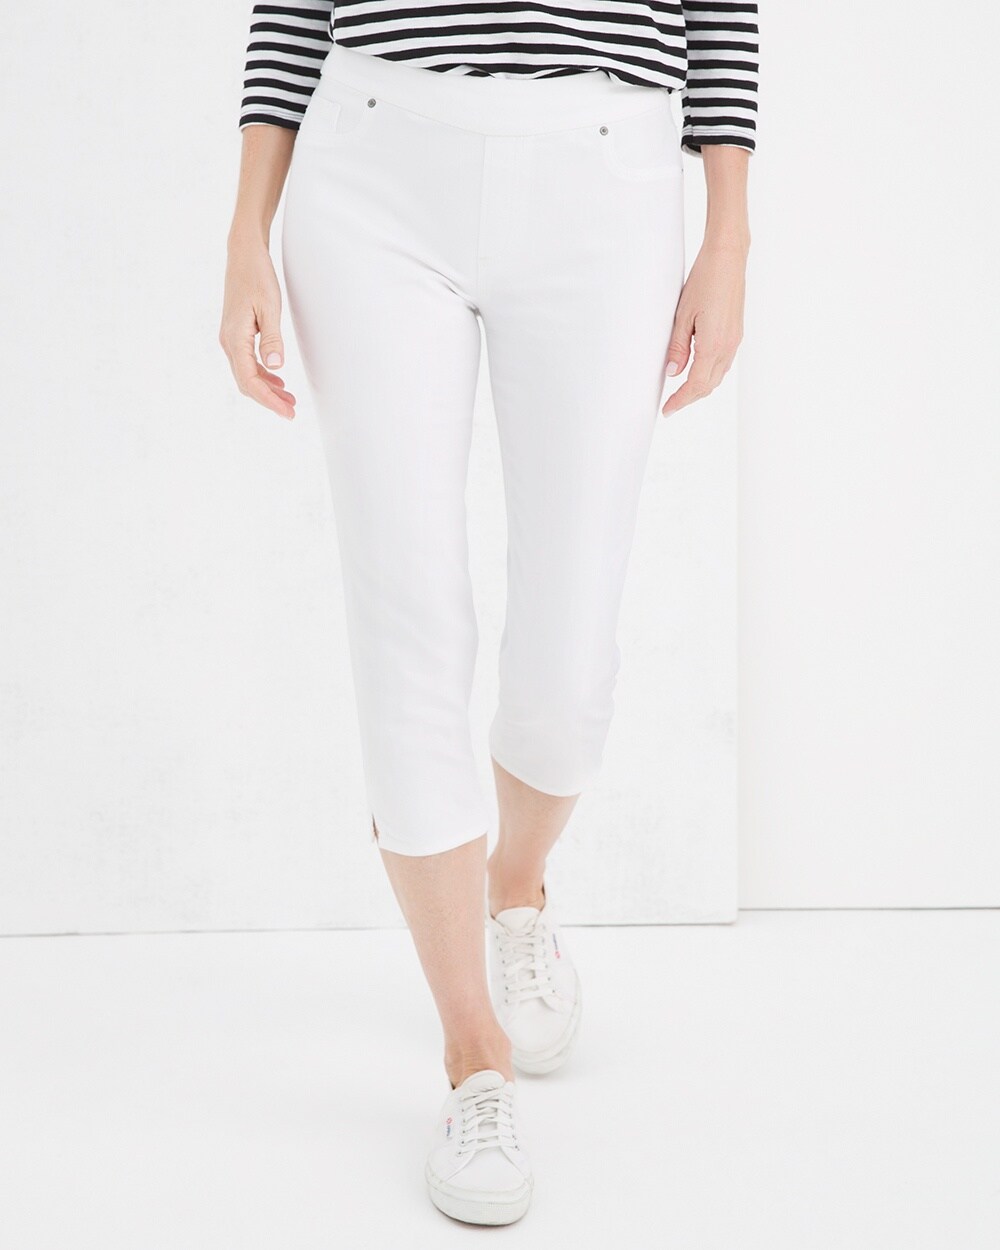 capri jeggings - OFF-53% >Free Delivery